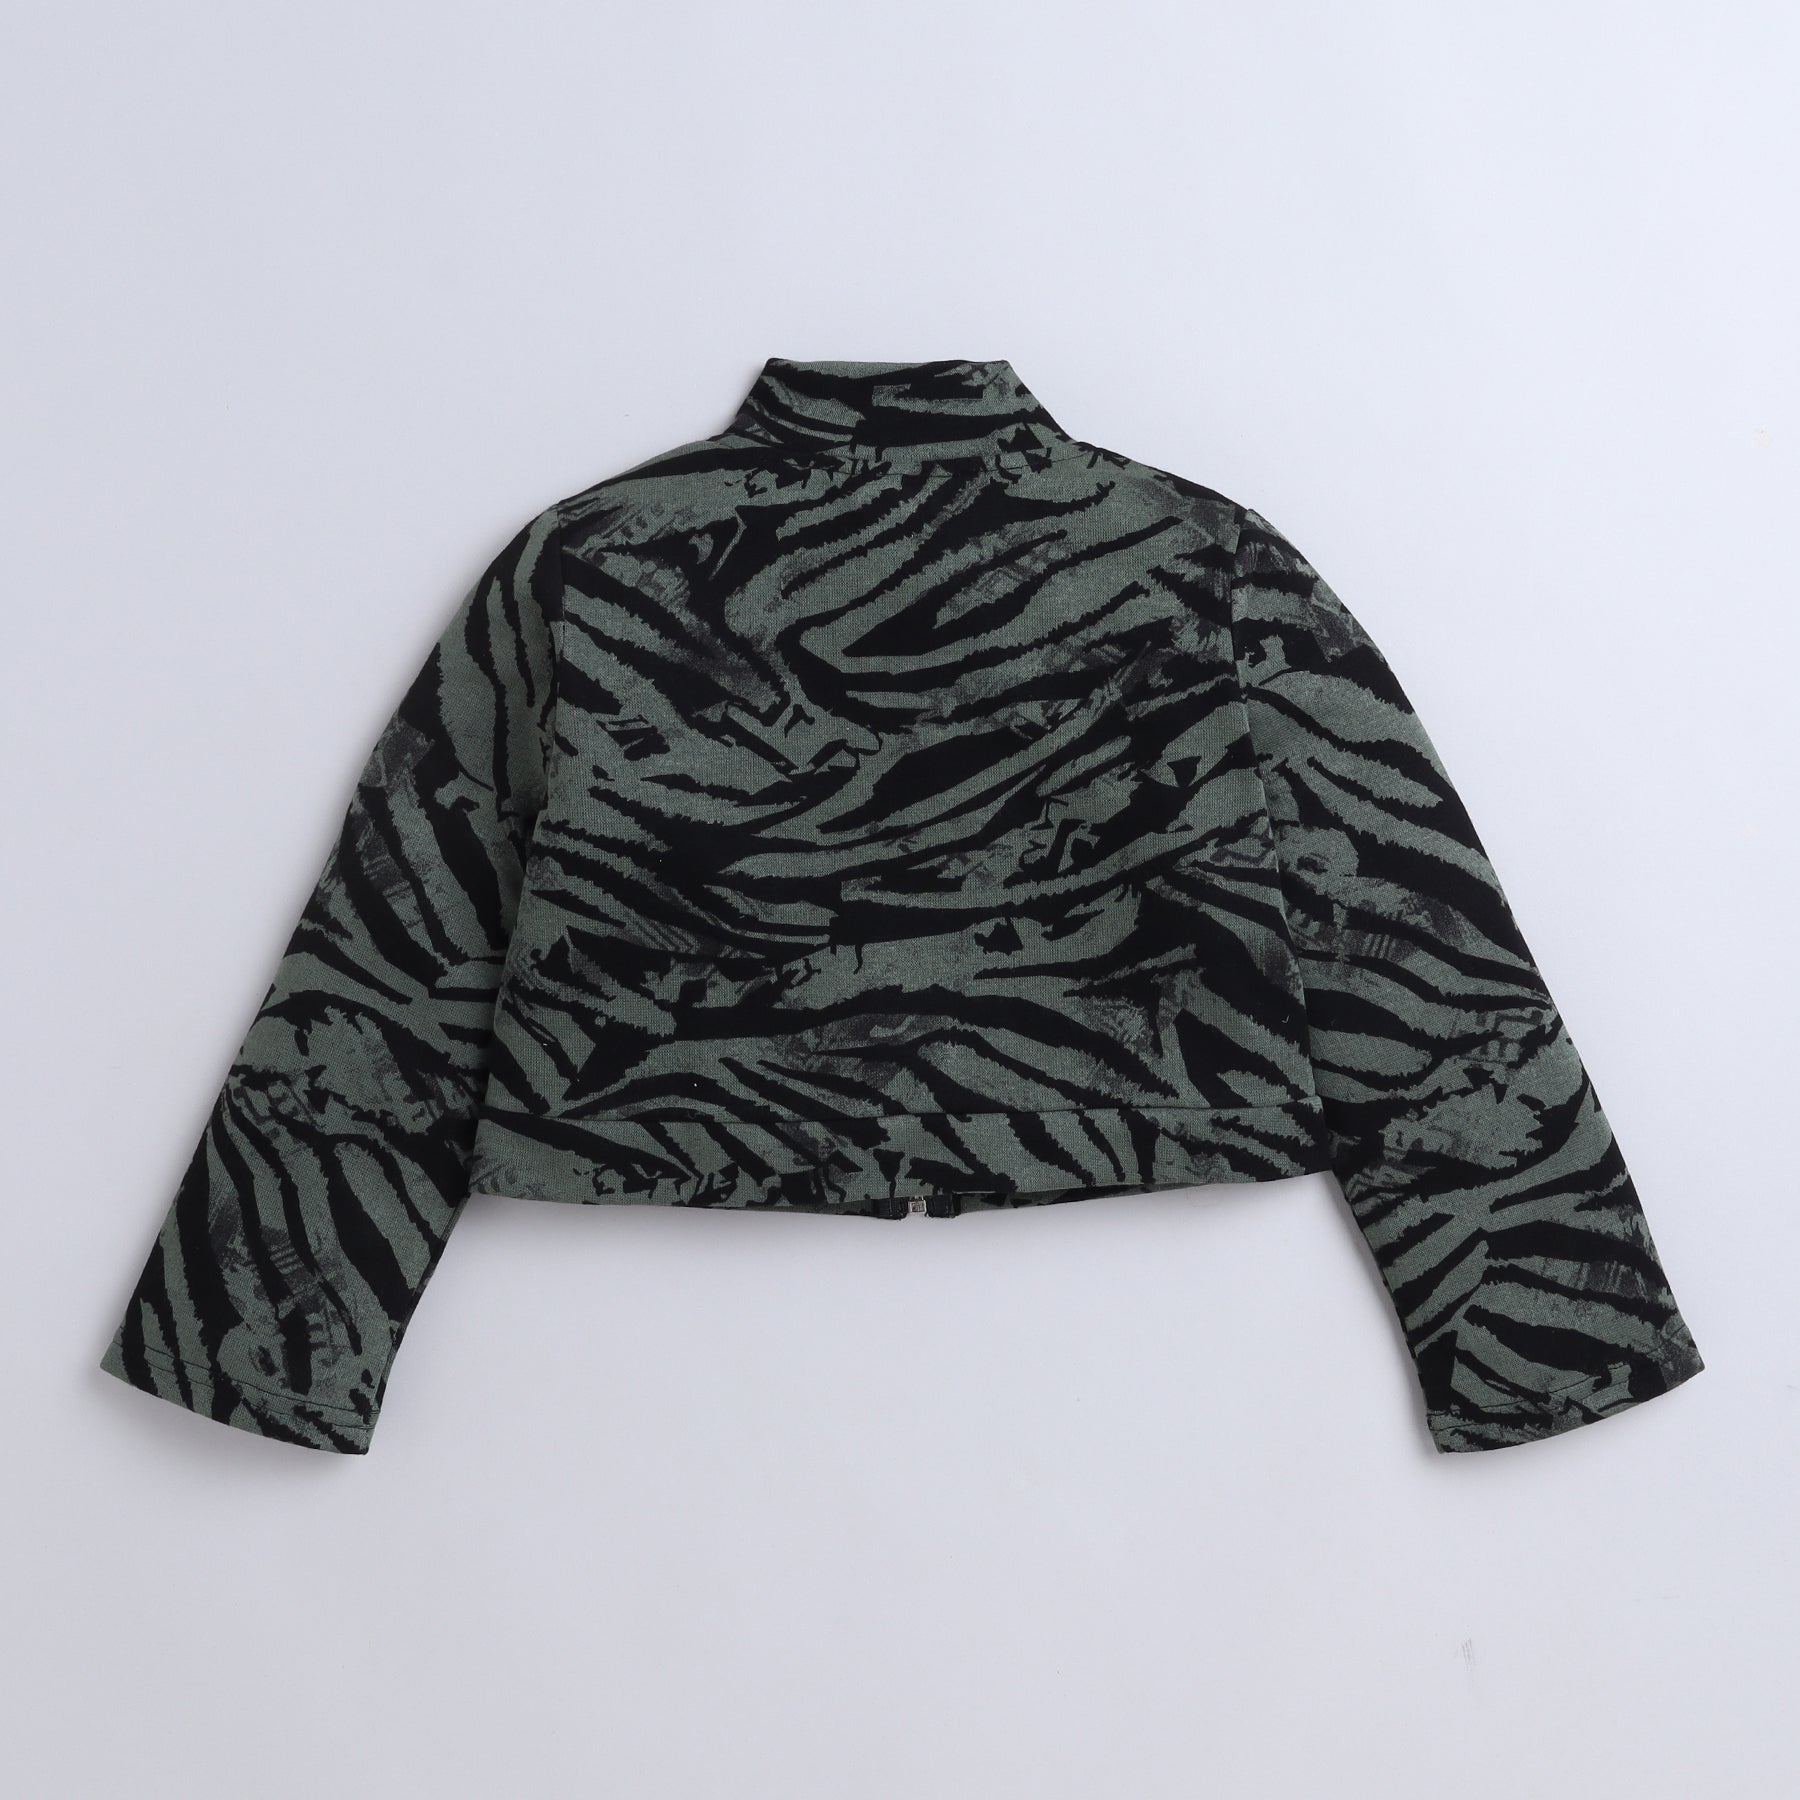 animal printed zip-up jacket with matching skirt and solid singlet crop top set-black\green